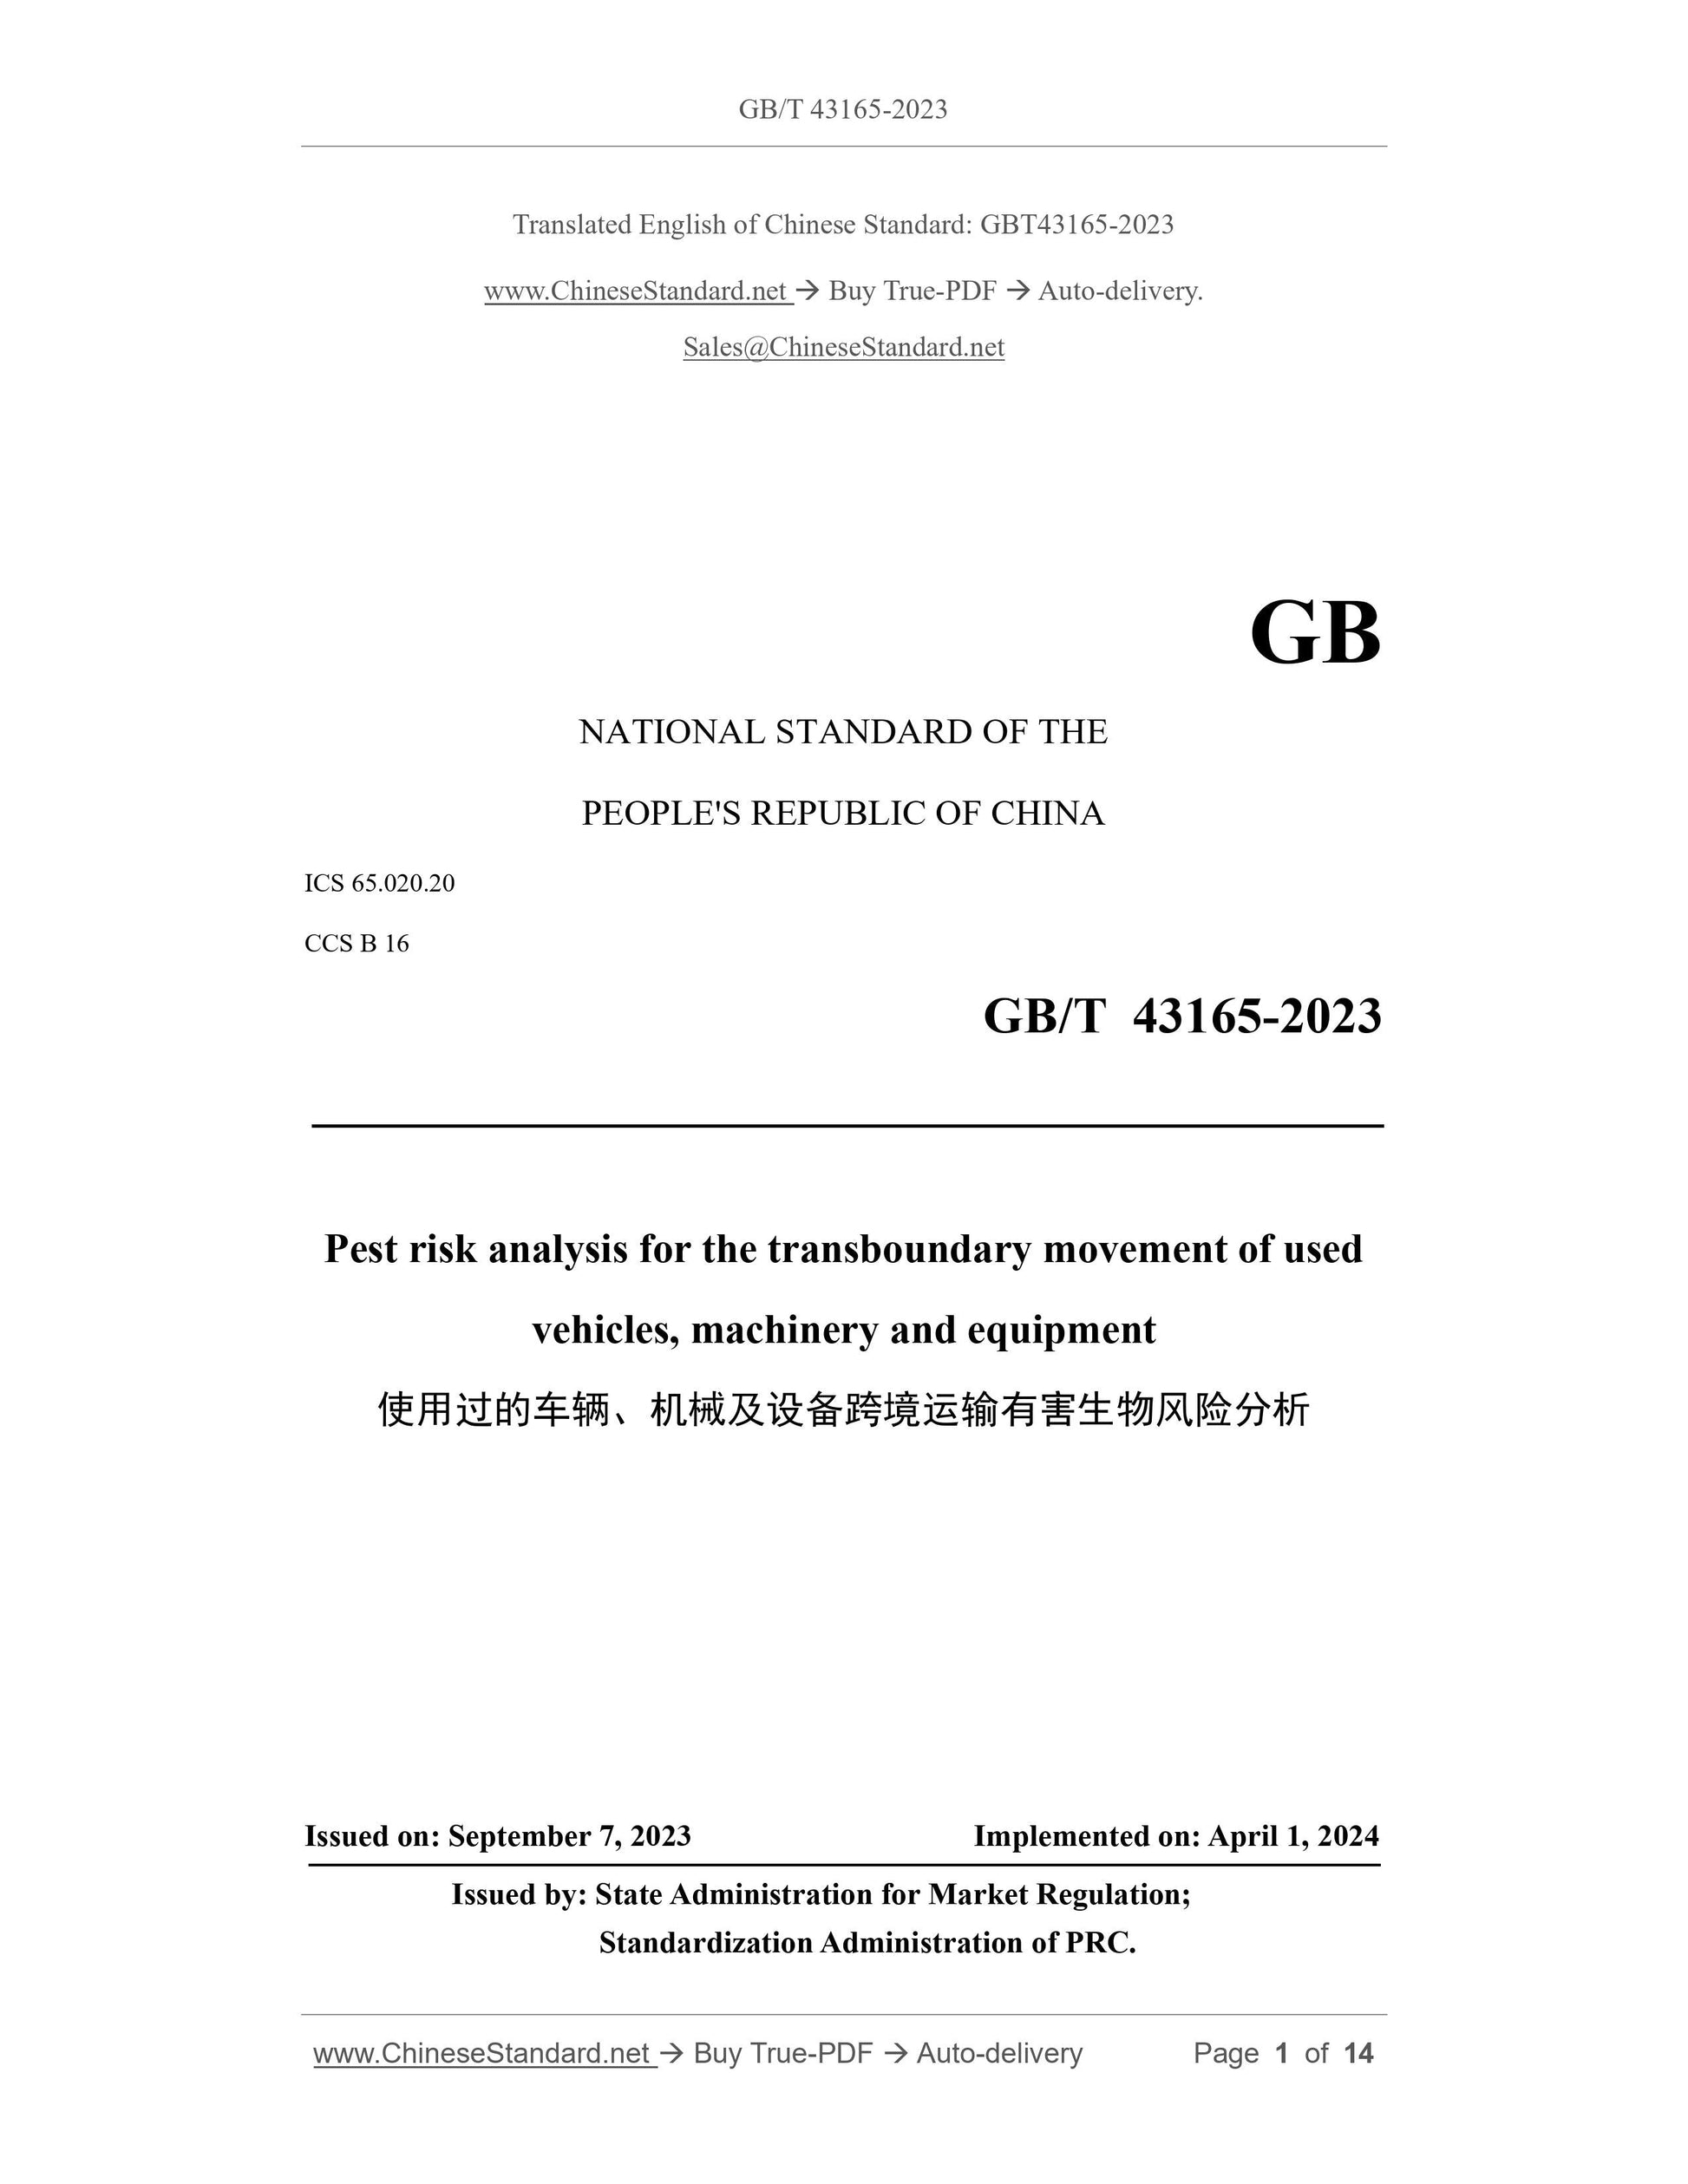 GB/T 43165-2023 Page 1